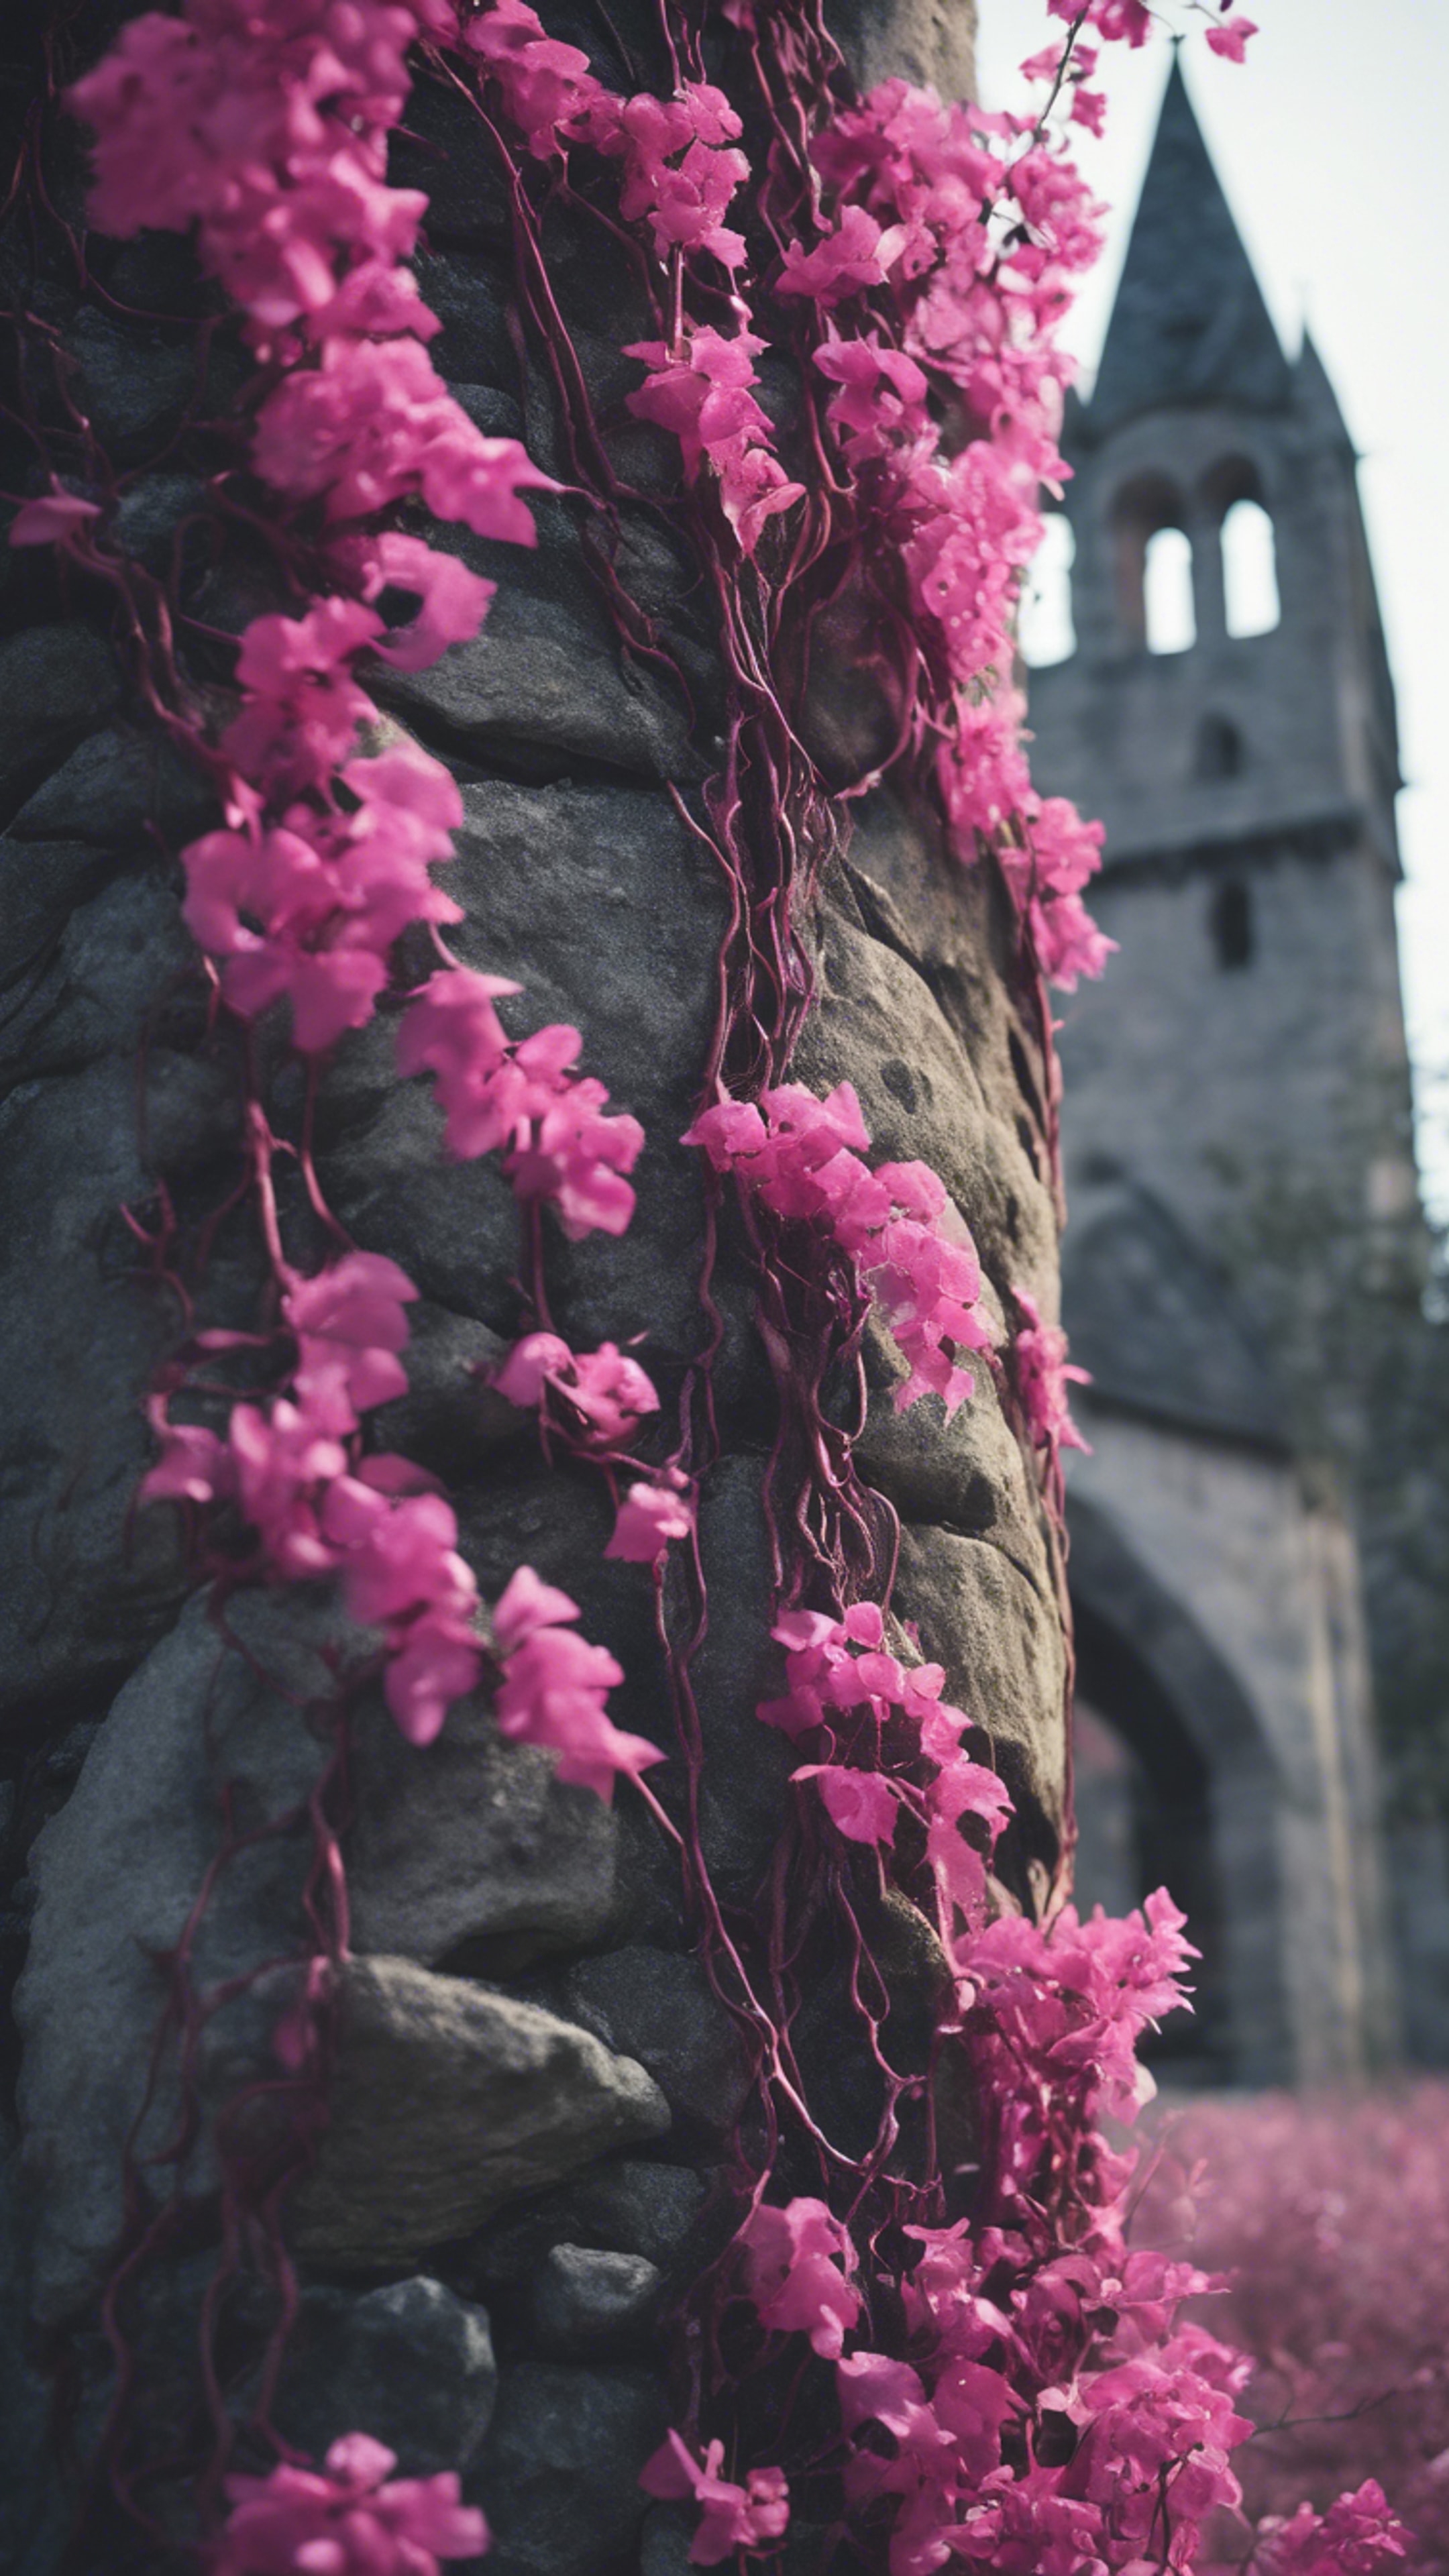 Dark pink Gothic vines creeping up a stone tower. Tapeta[2209f0af7d054e0296c9]